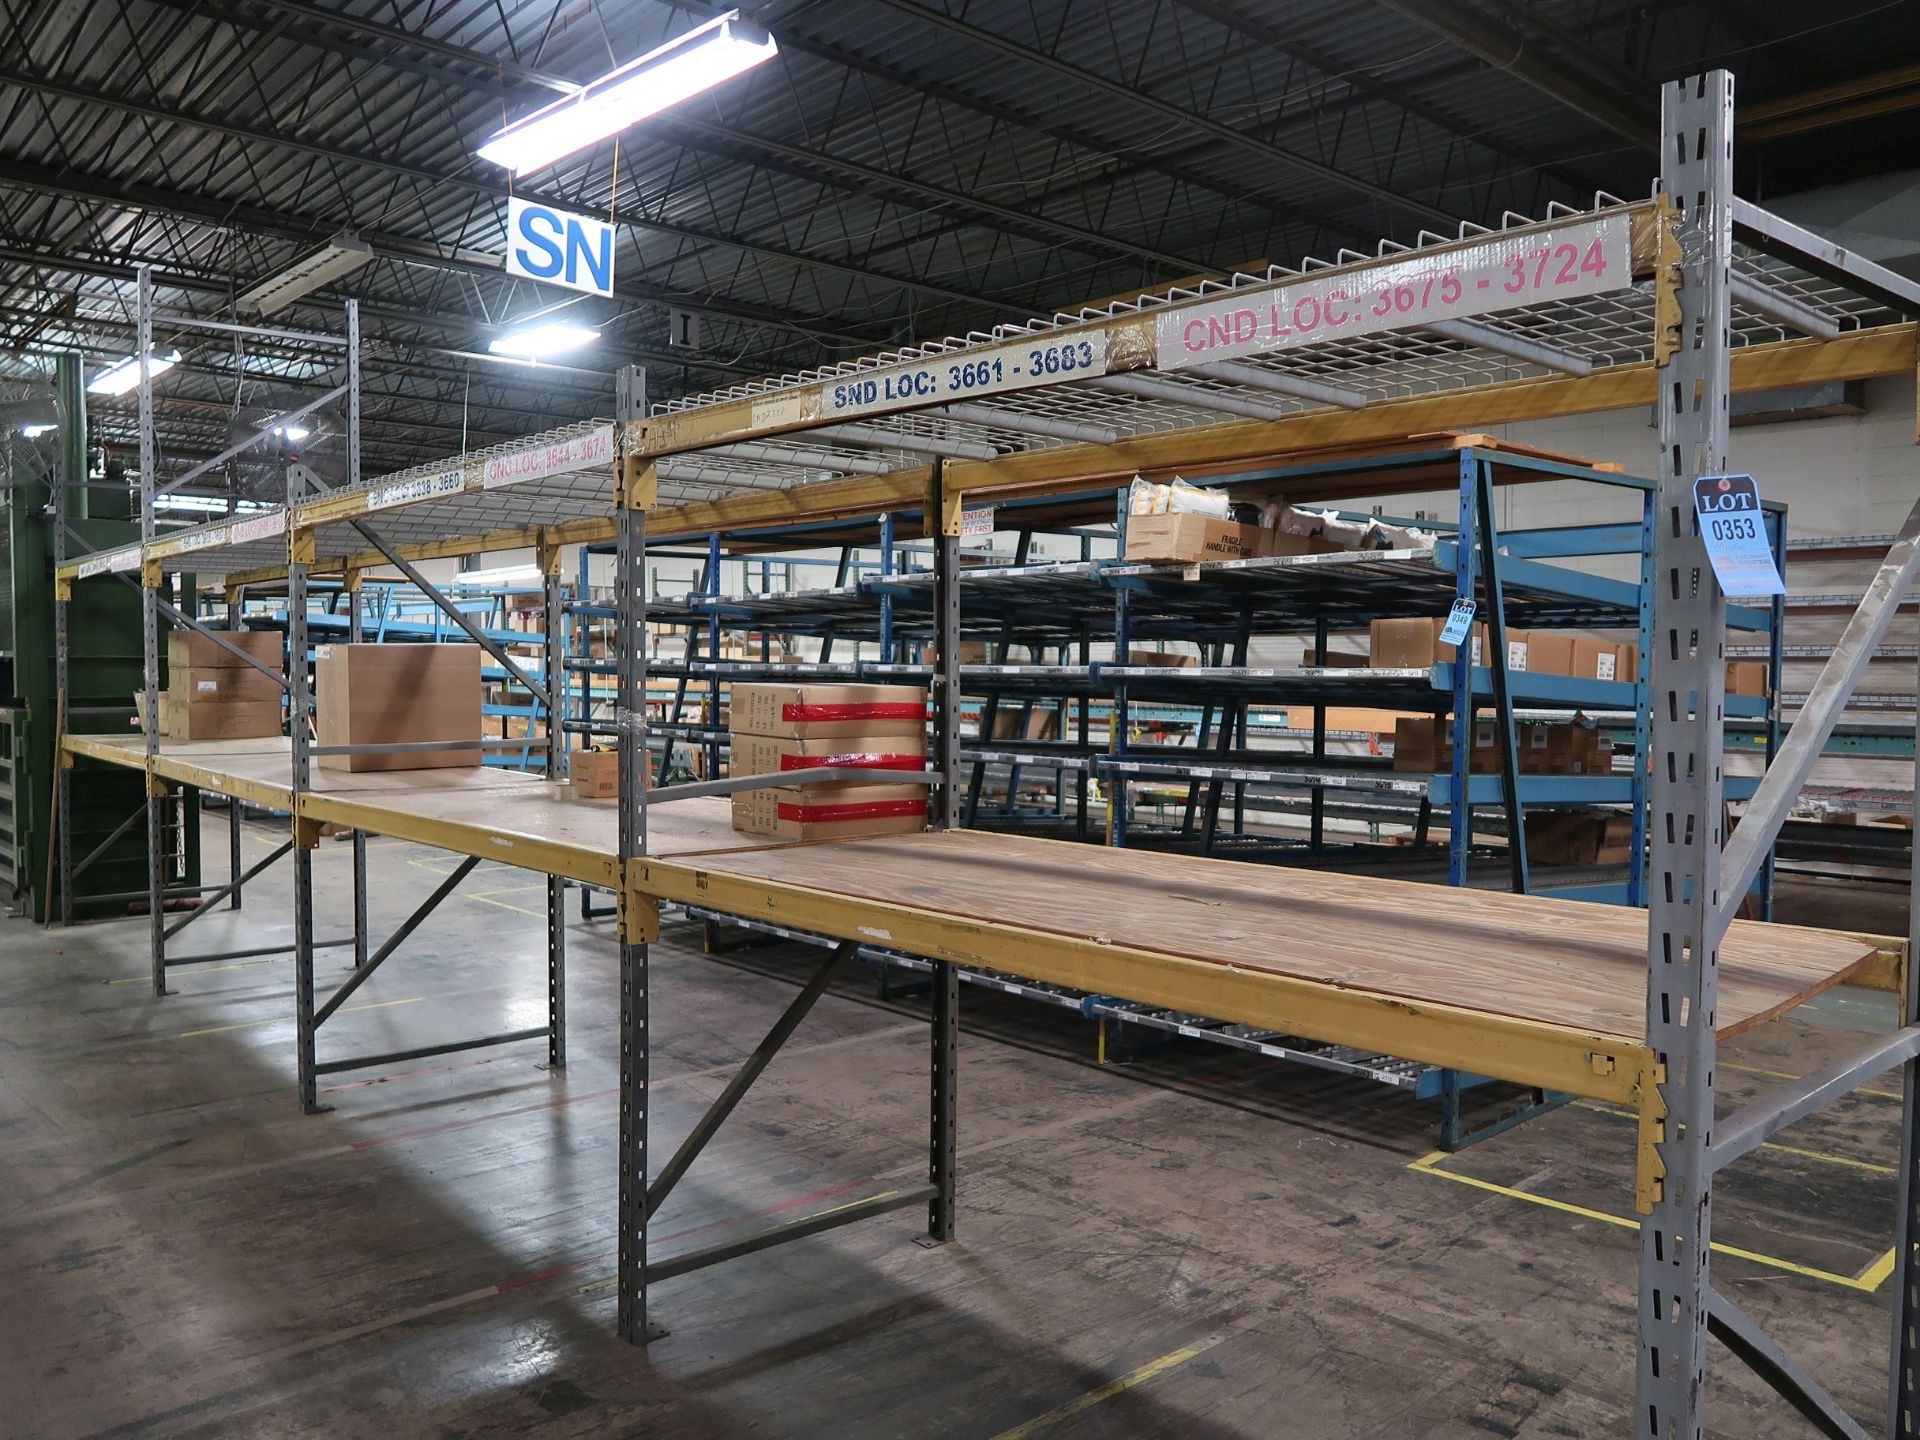 SECTIONS 96" X 42" X 96" ADJUSTABLE BEAM PALLET RACK; (5) 42" X 96" UPRIGHTS, (16) 96" CROSS